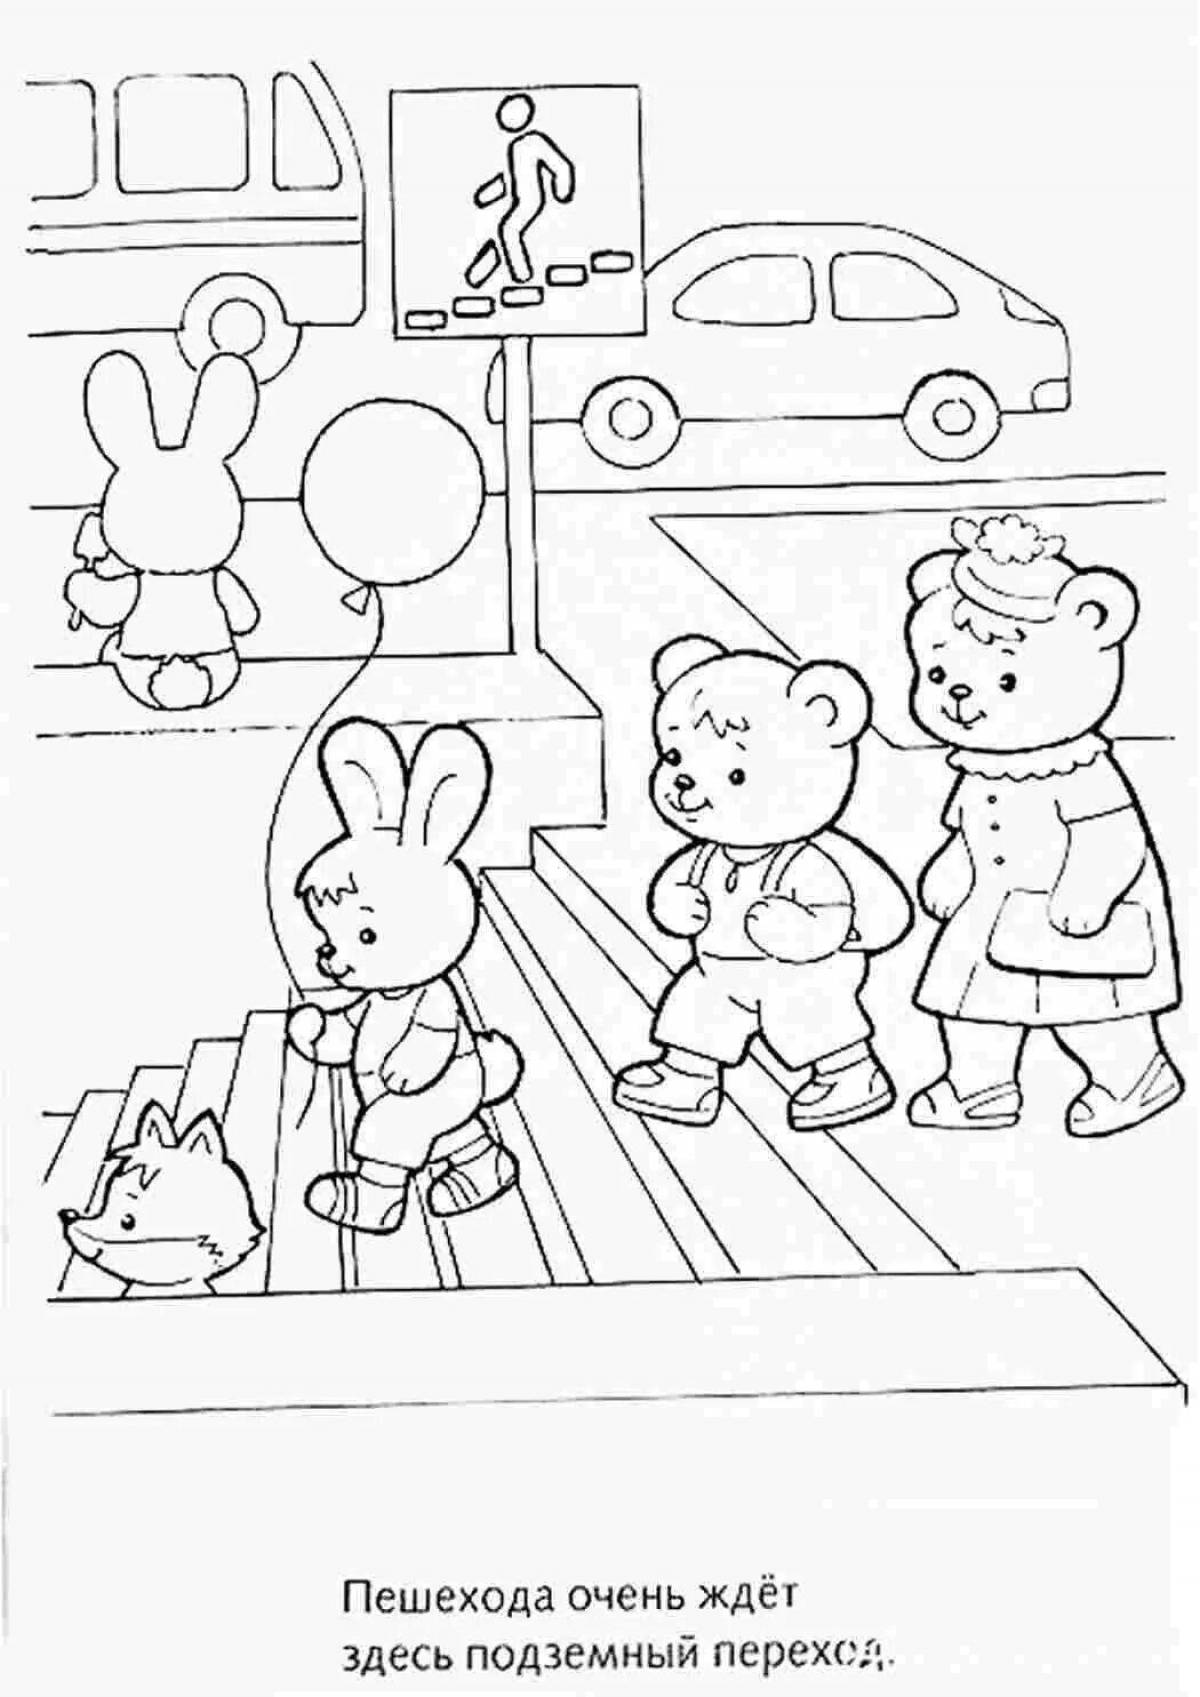 Colorful safety alphabet coloring page for preschoolers